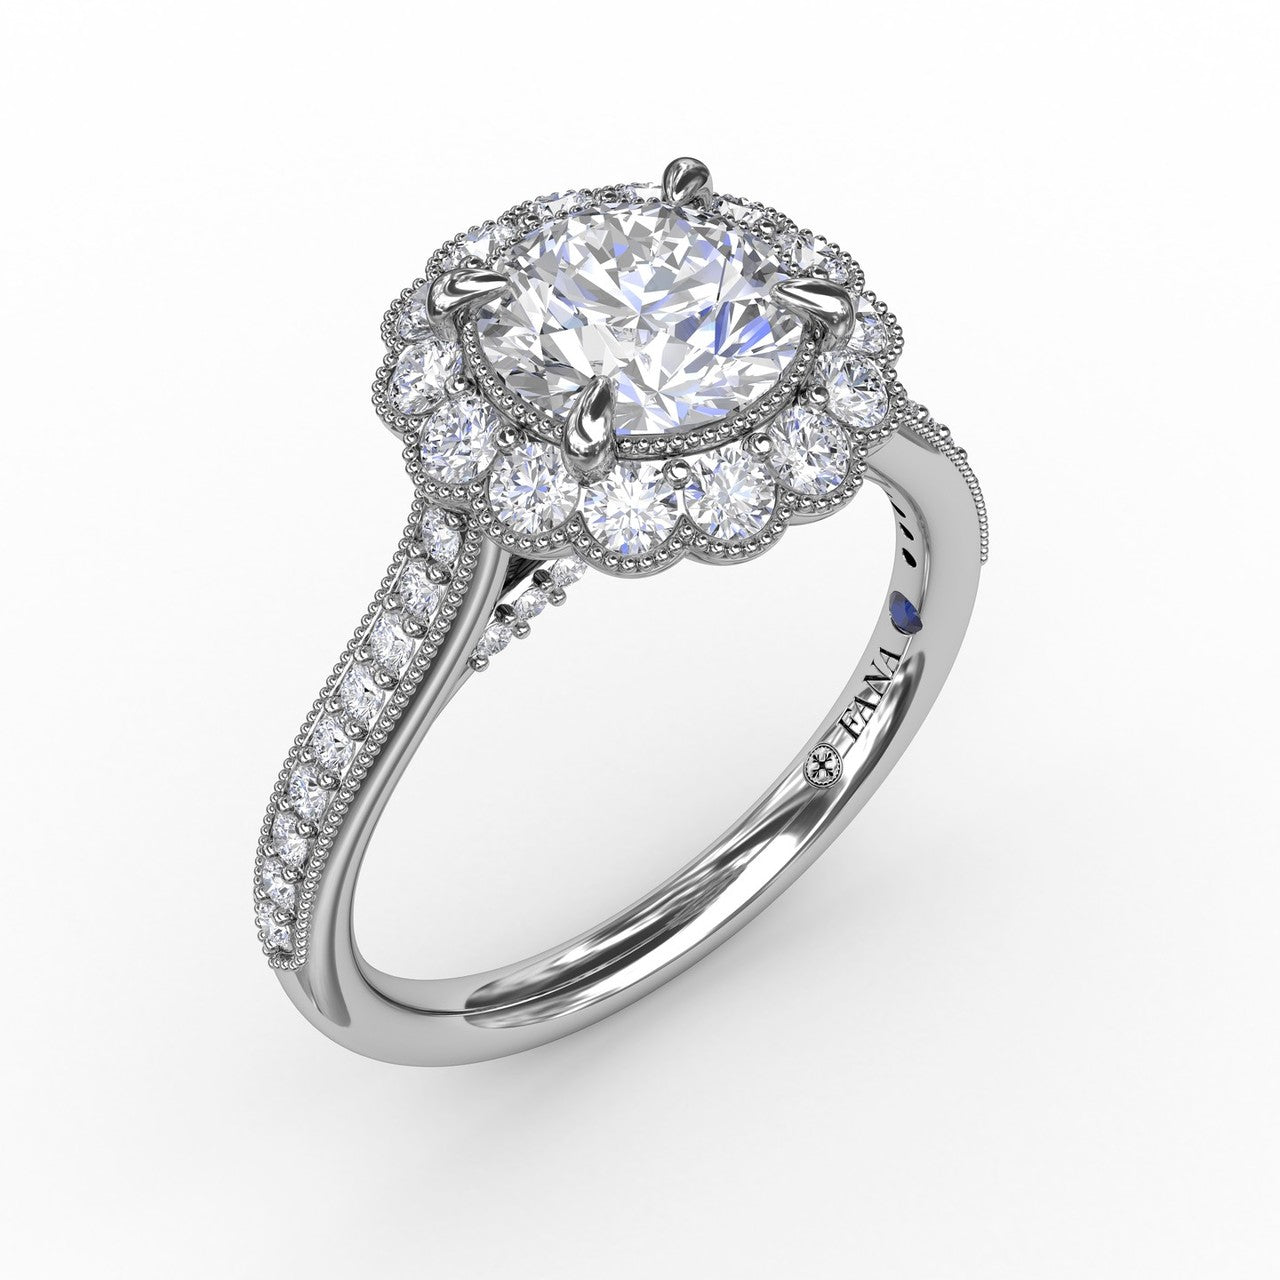 Vintage Scalloped Halo Engagement Ring With Milgrain Details